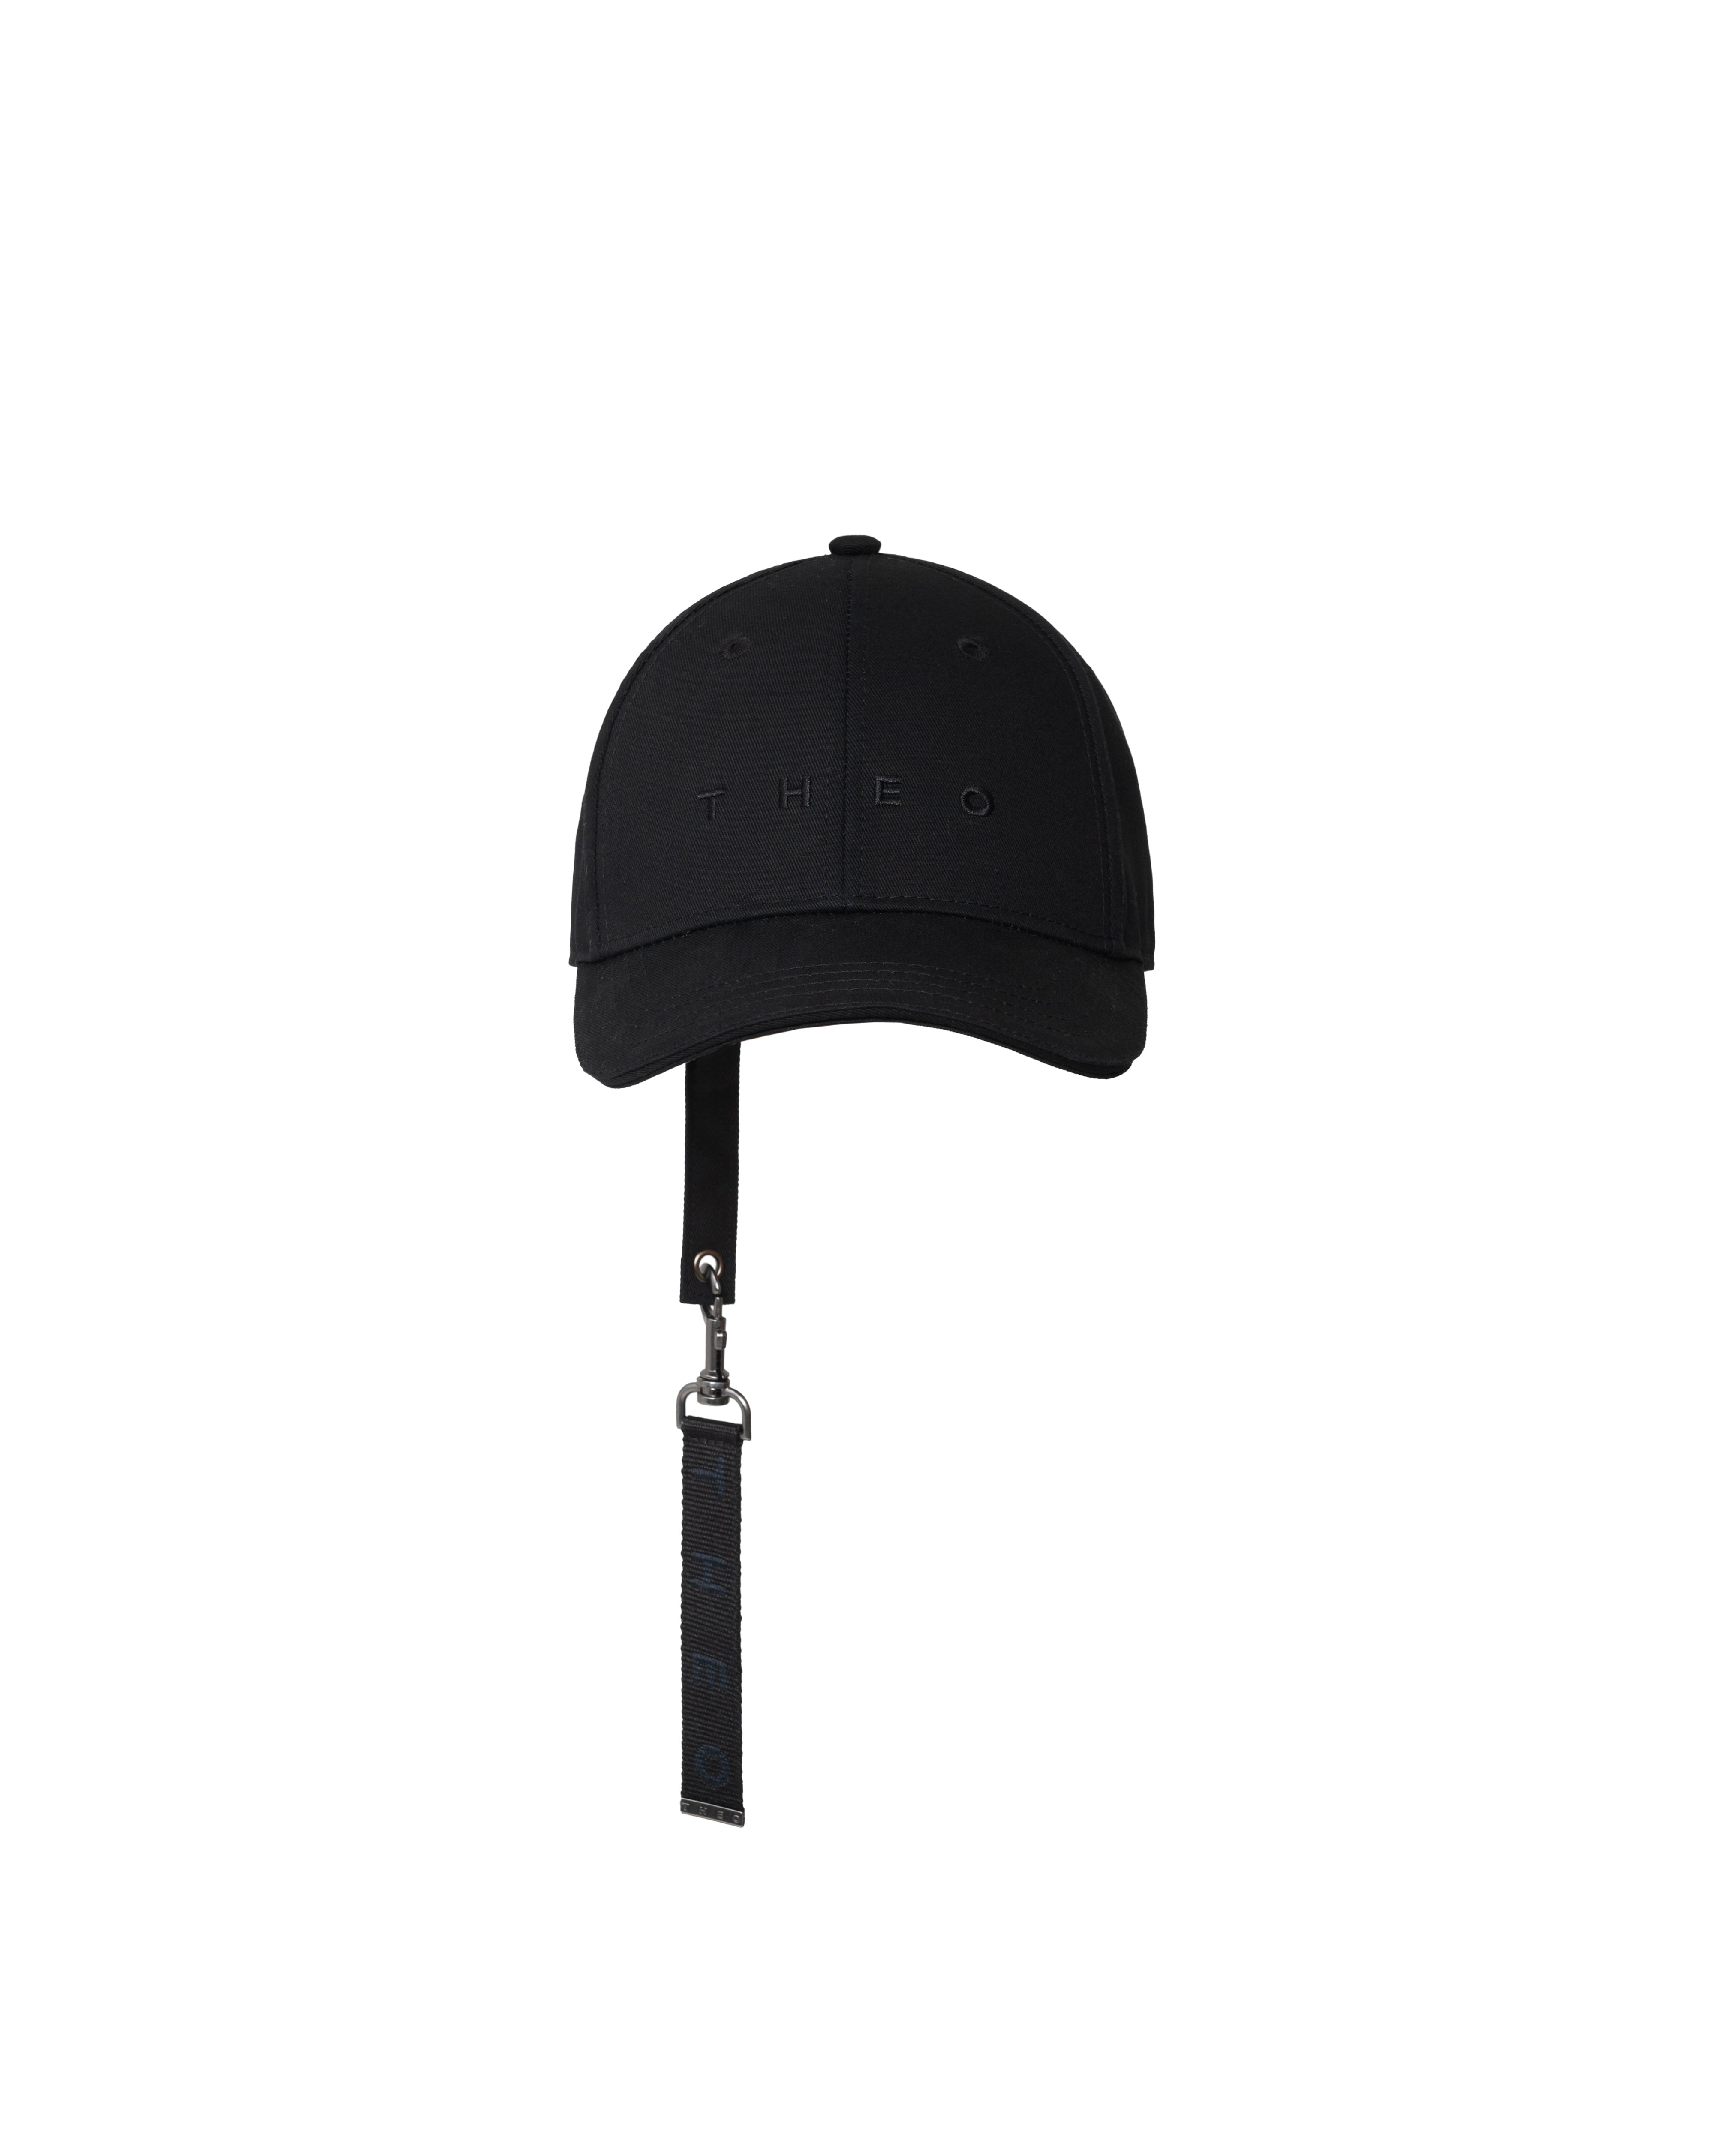 THEO CAP WITH KEYCHAIN